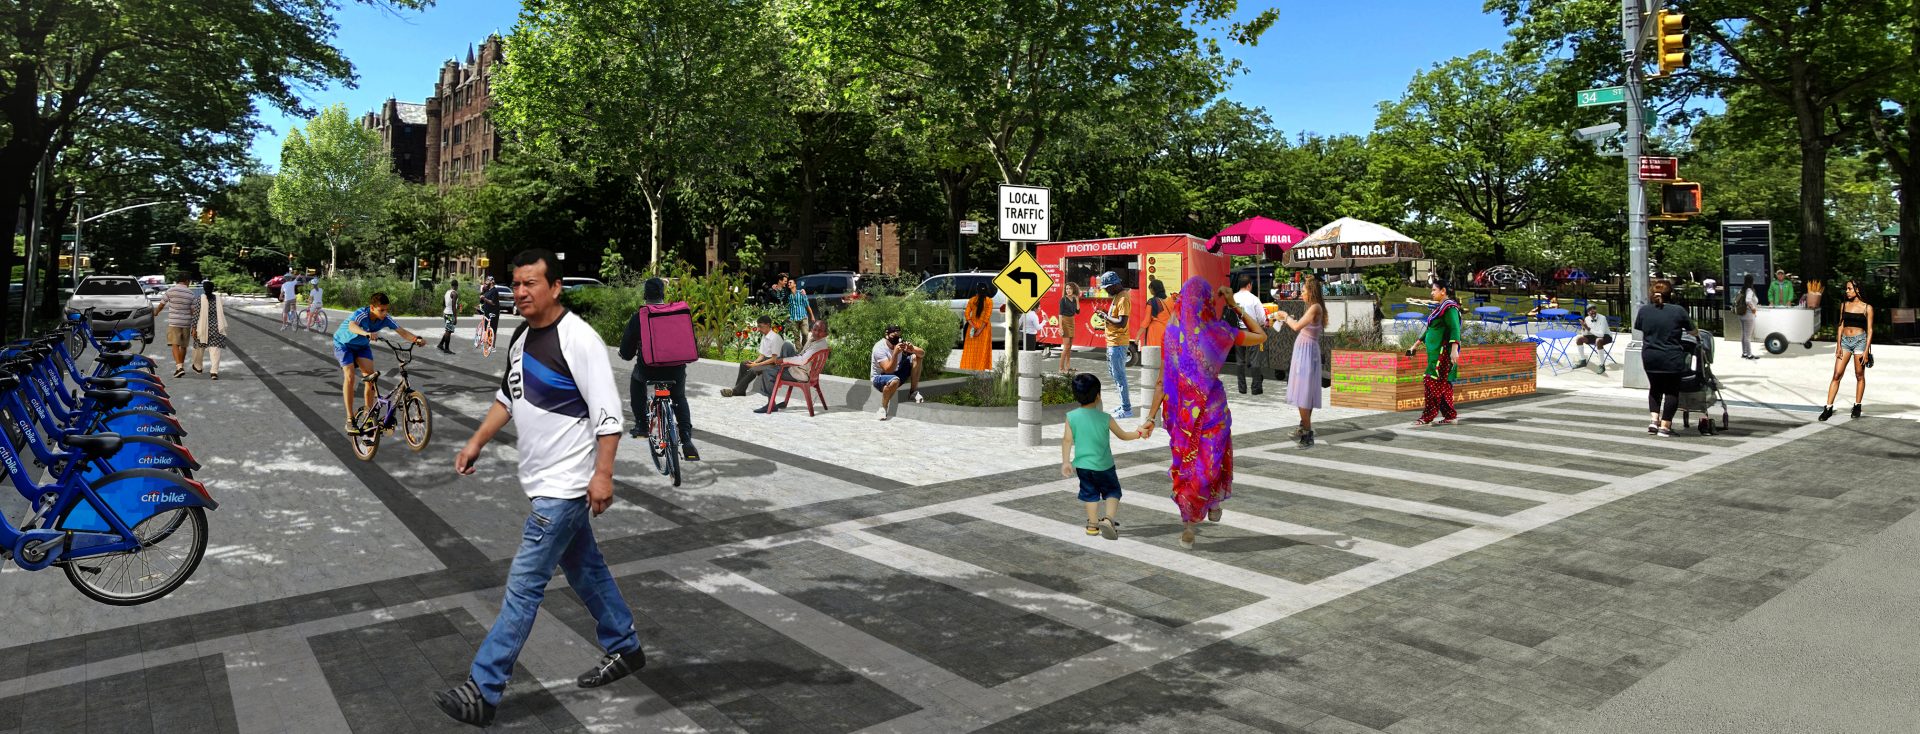 Street Plans joins DC ‘Crossing the Street’ Initiative